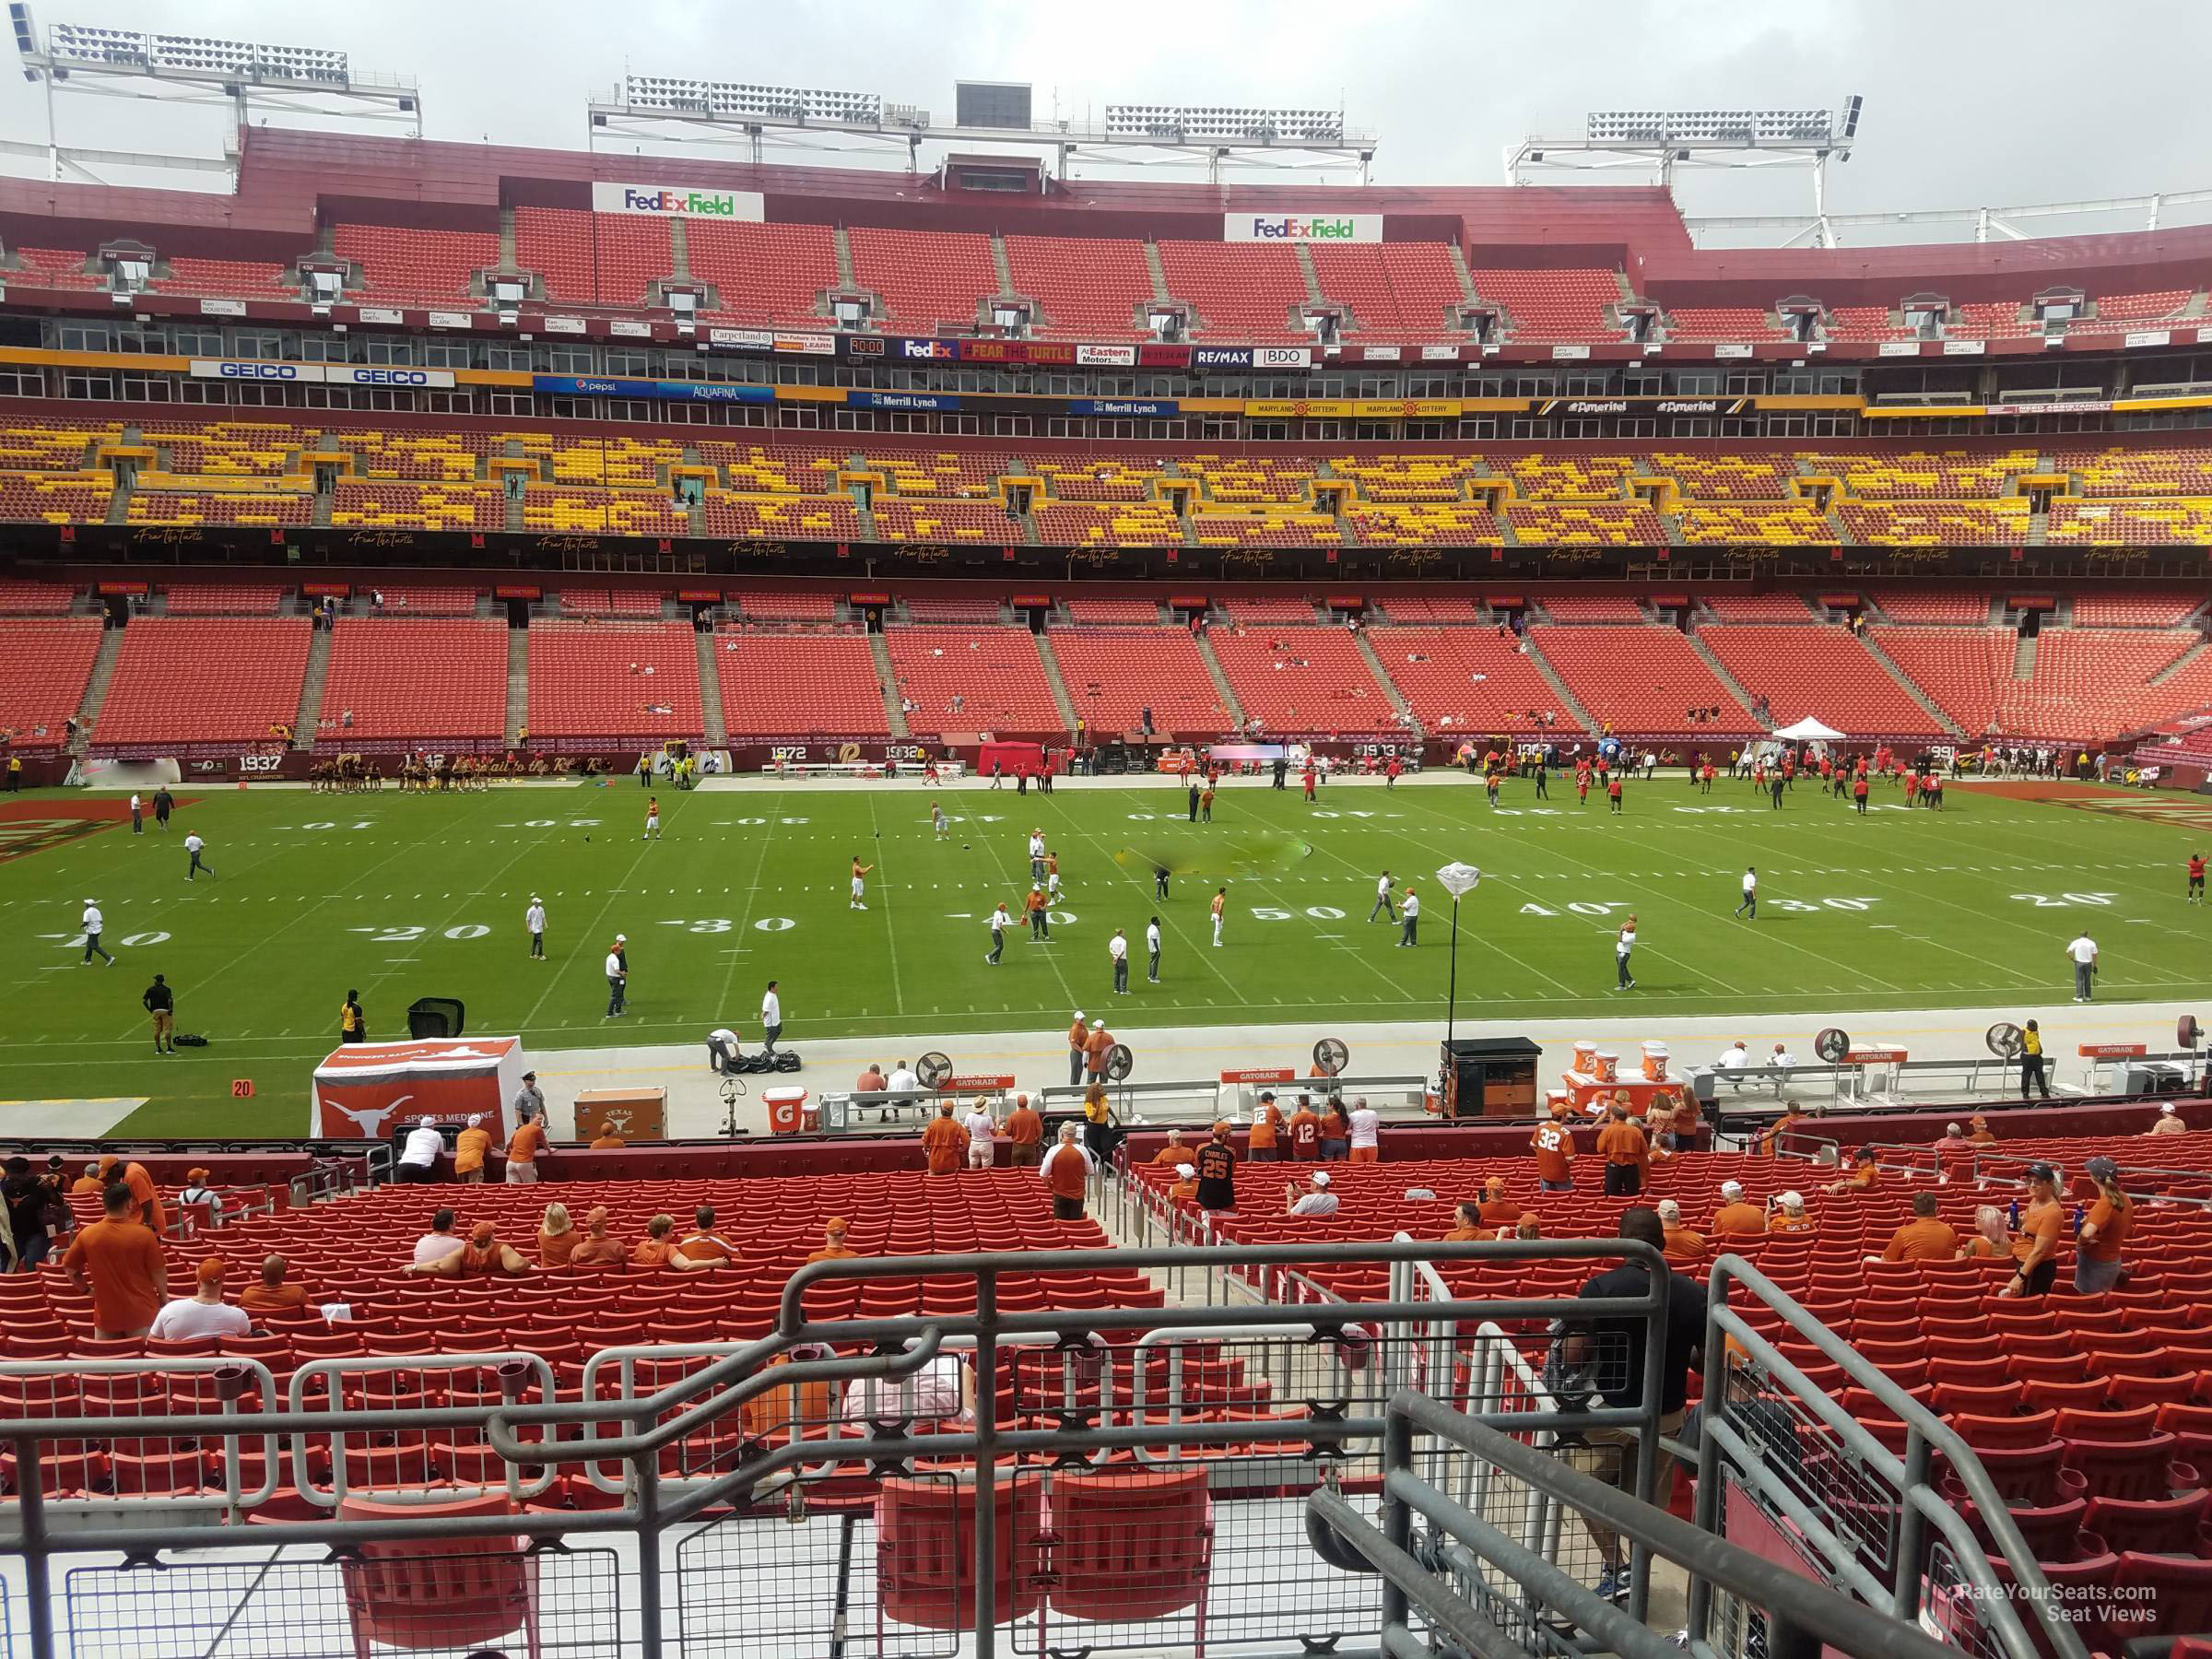 section 223, row 4 seat view  - fedexfield